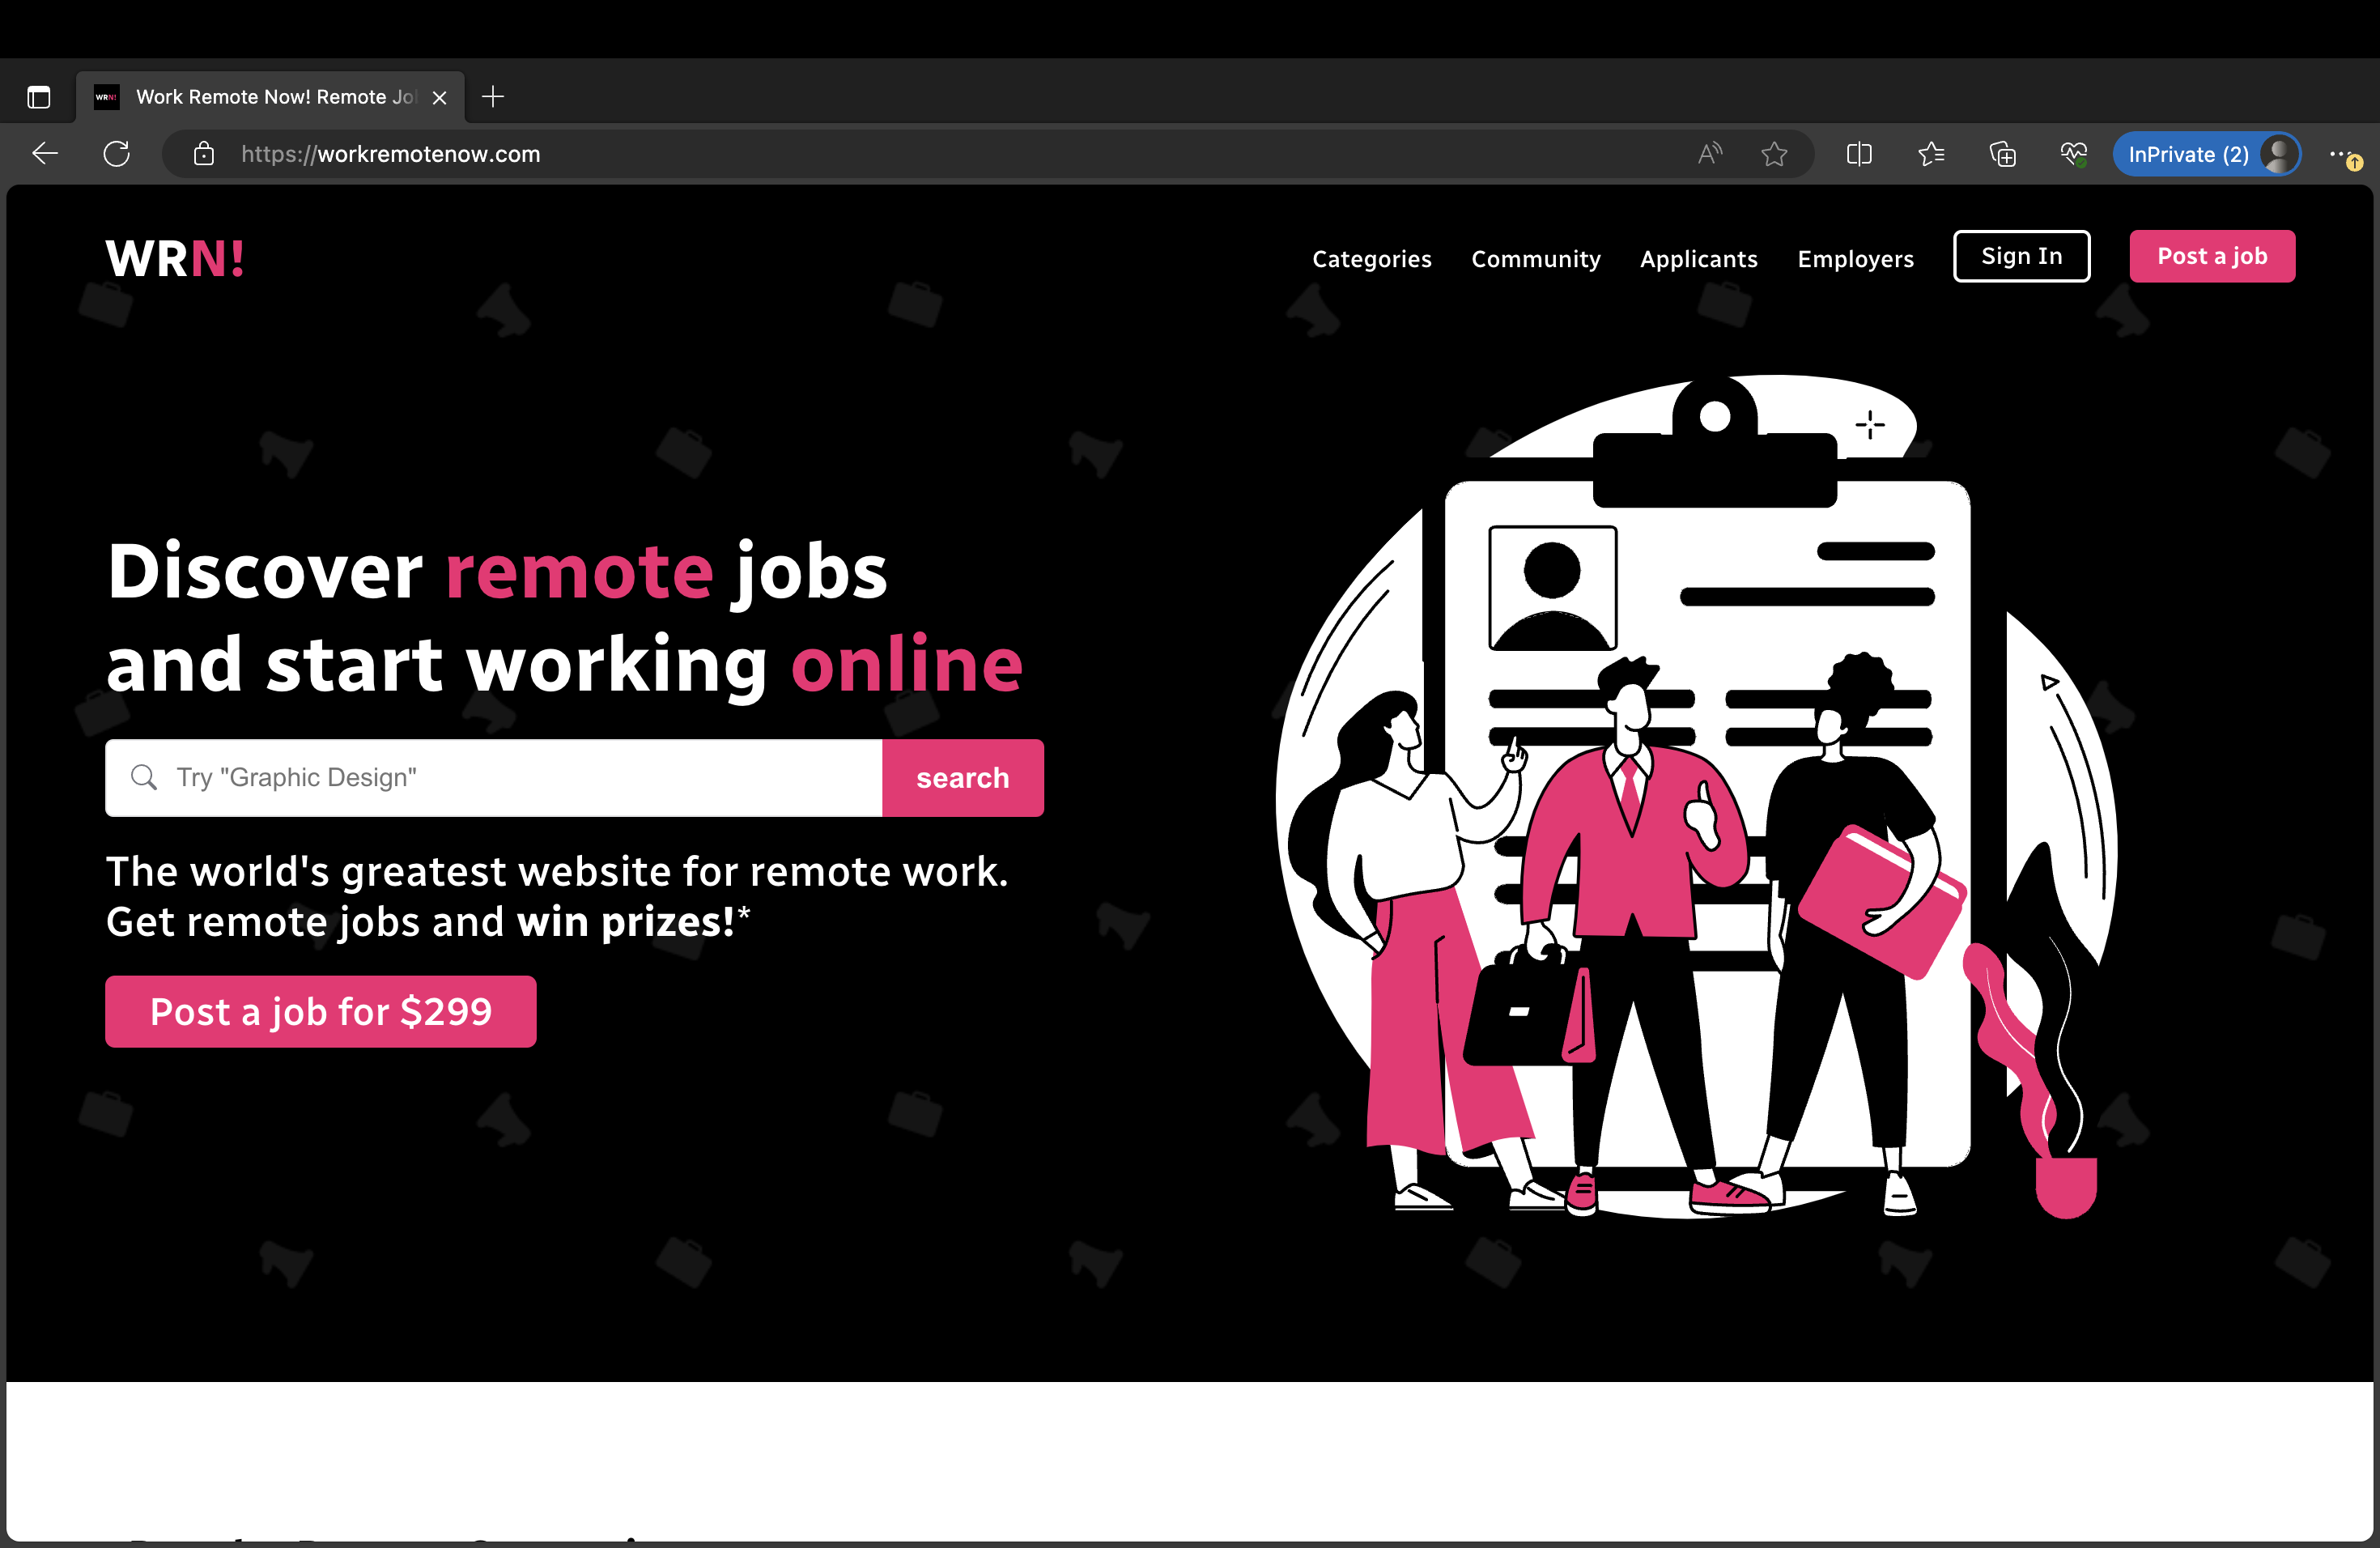 Work Remote Now Work Remote Now! Homepage